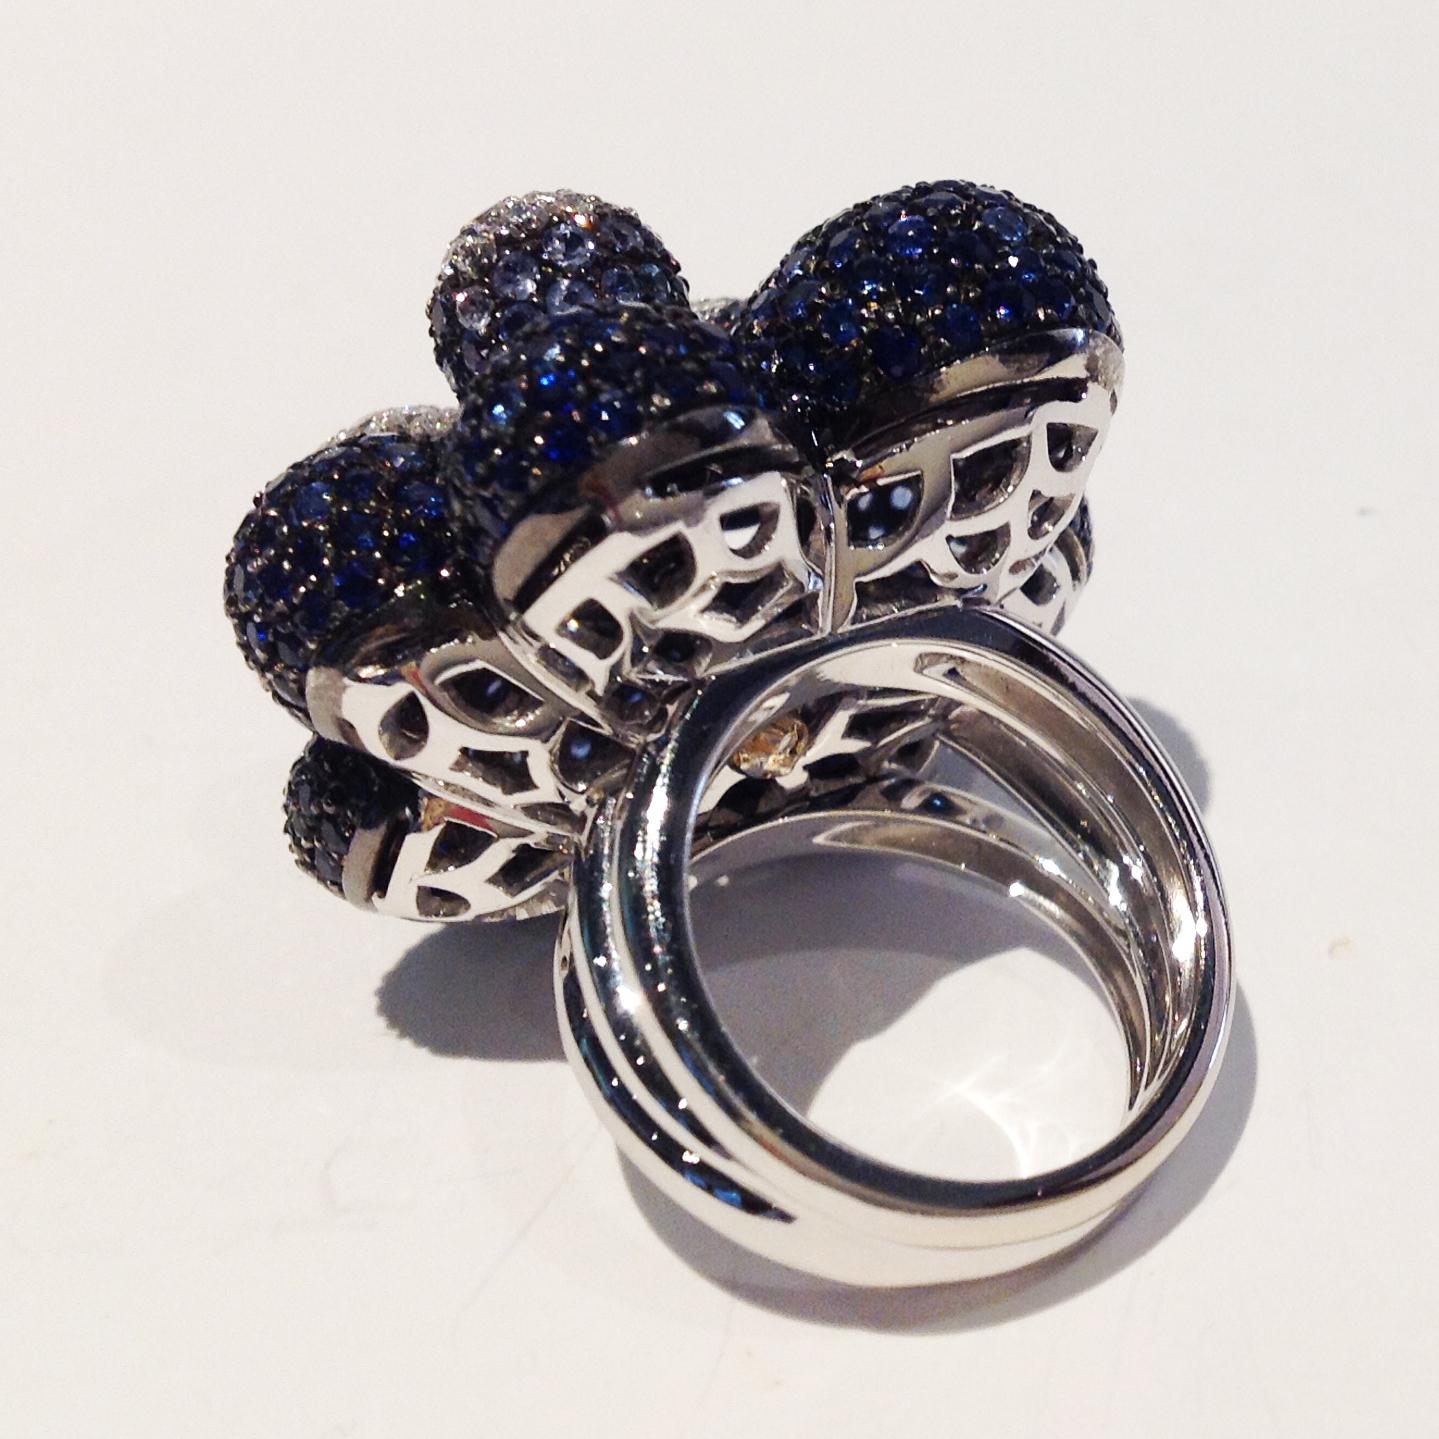 Paolo Piovan Blue Sapphires White Diamonds 18 Karat White Gold Ring In New Condition For Sale In Padova, Padova